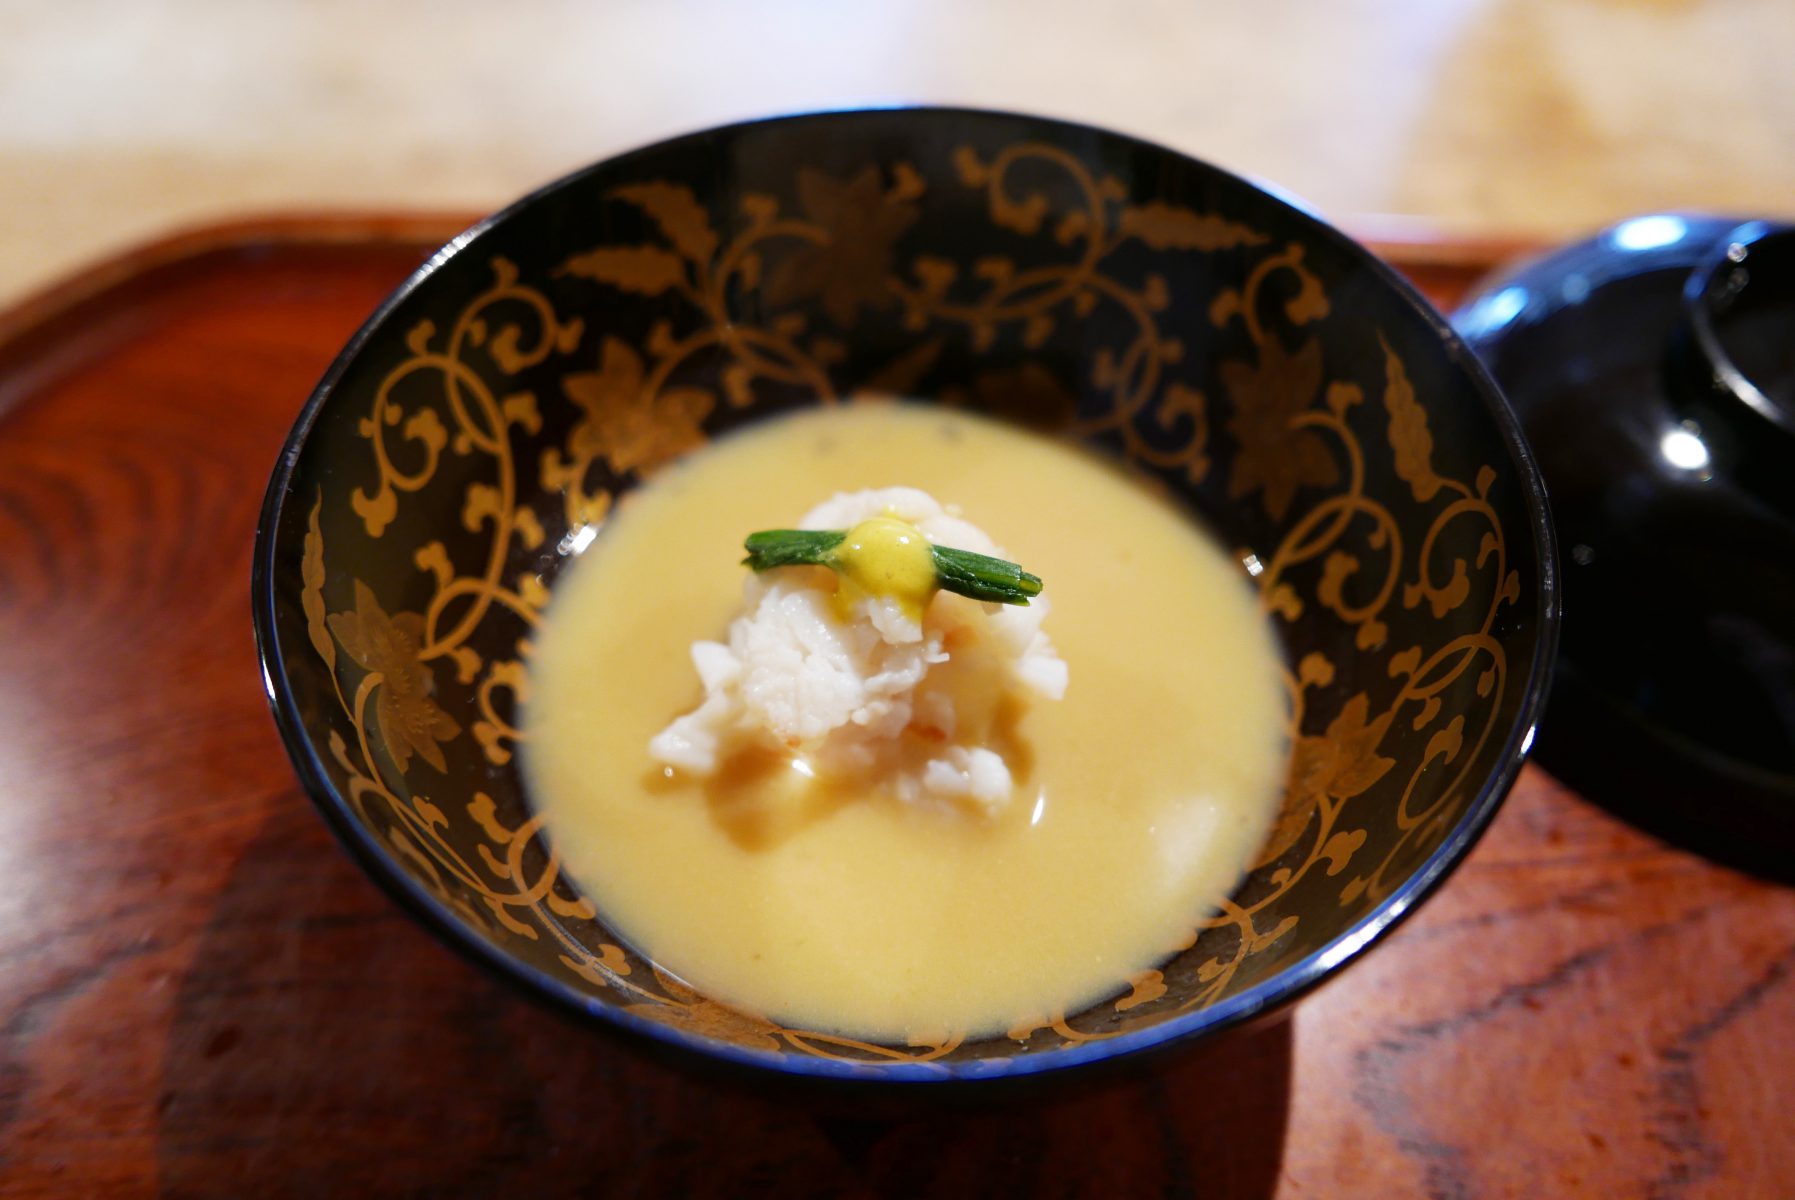 Ise-ebi (Japanese spiny lobster) with white miso velouté